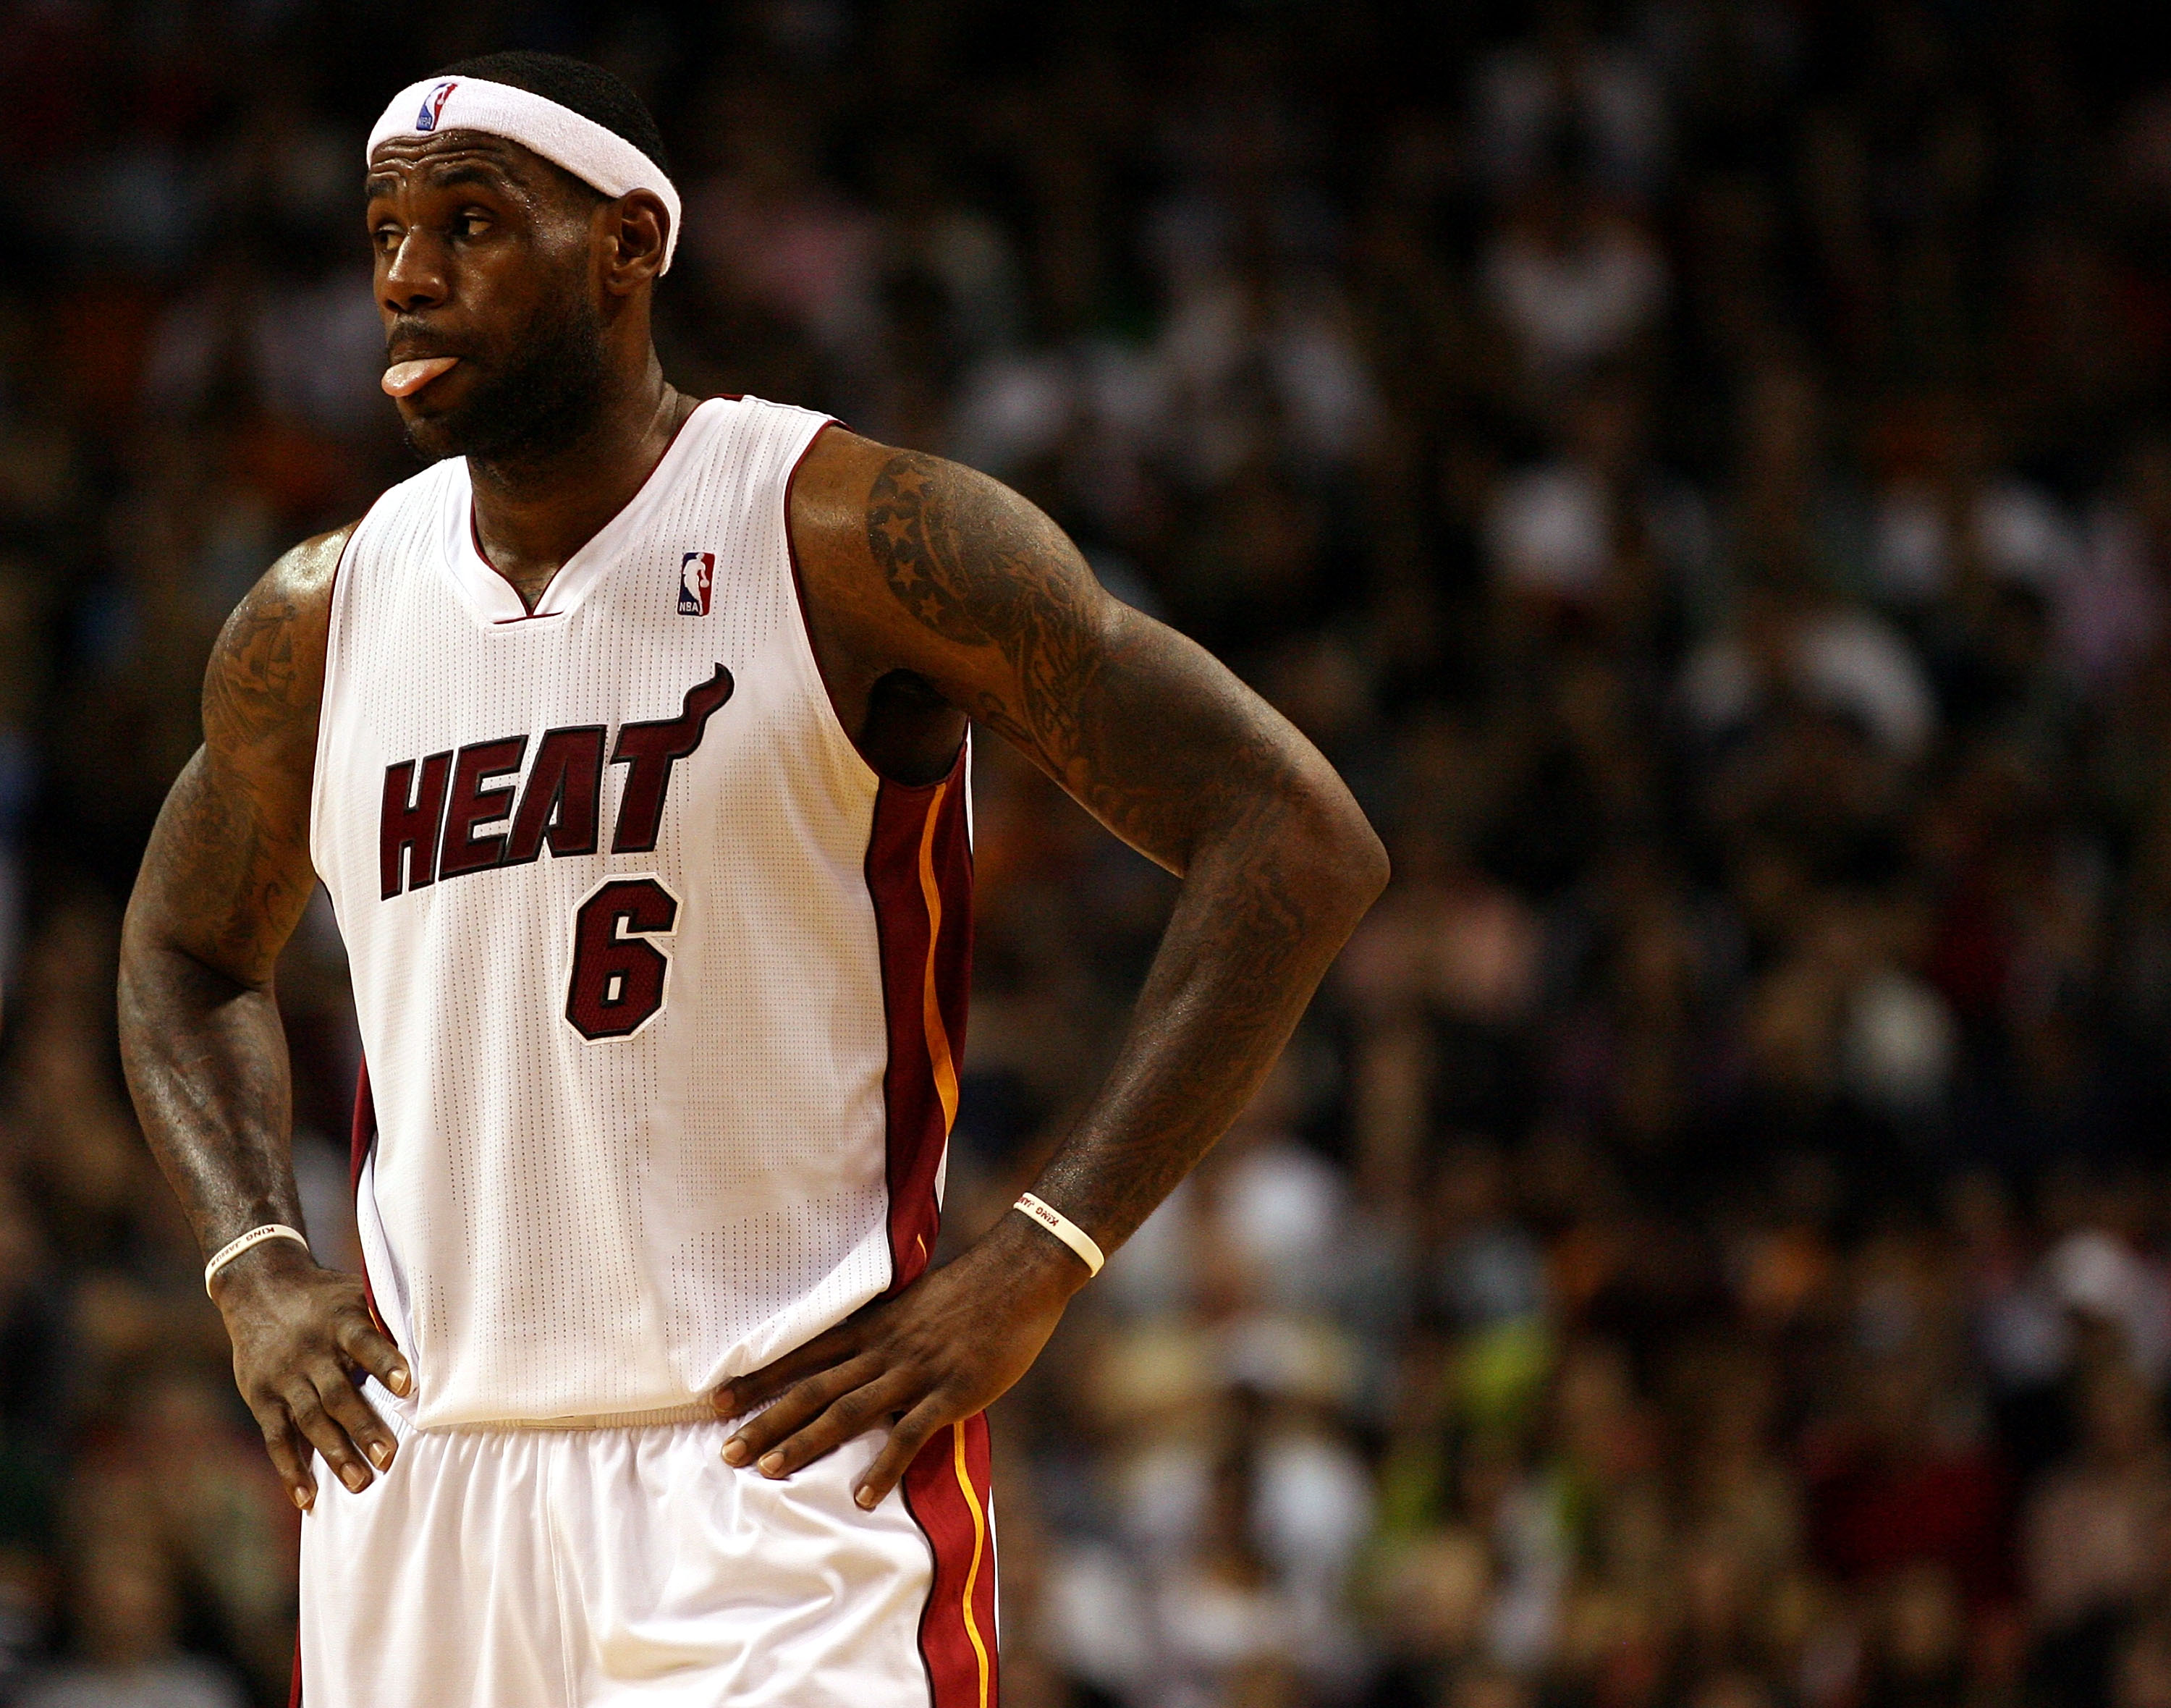 The Miami Heat's Early Uniforms Were a Mess